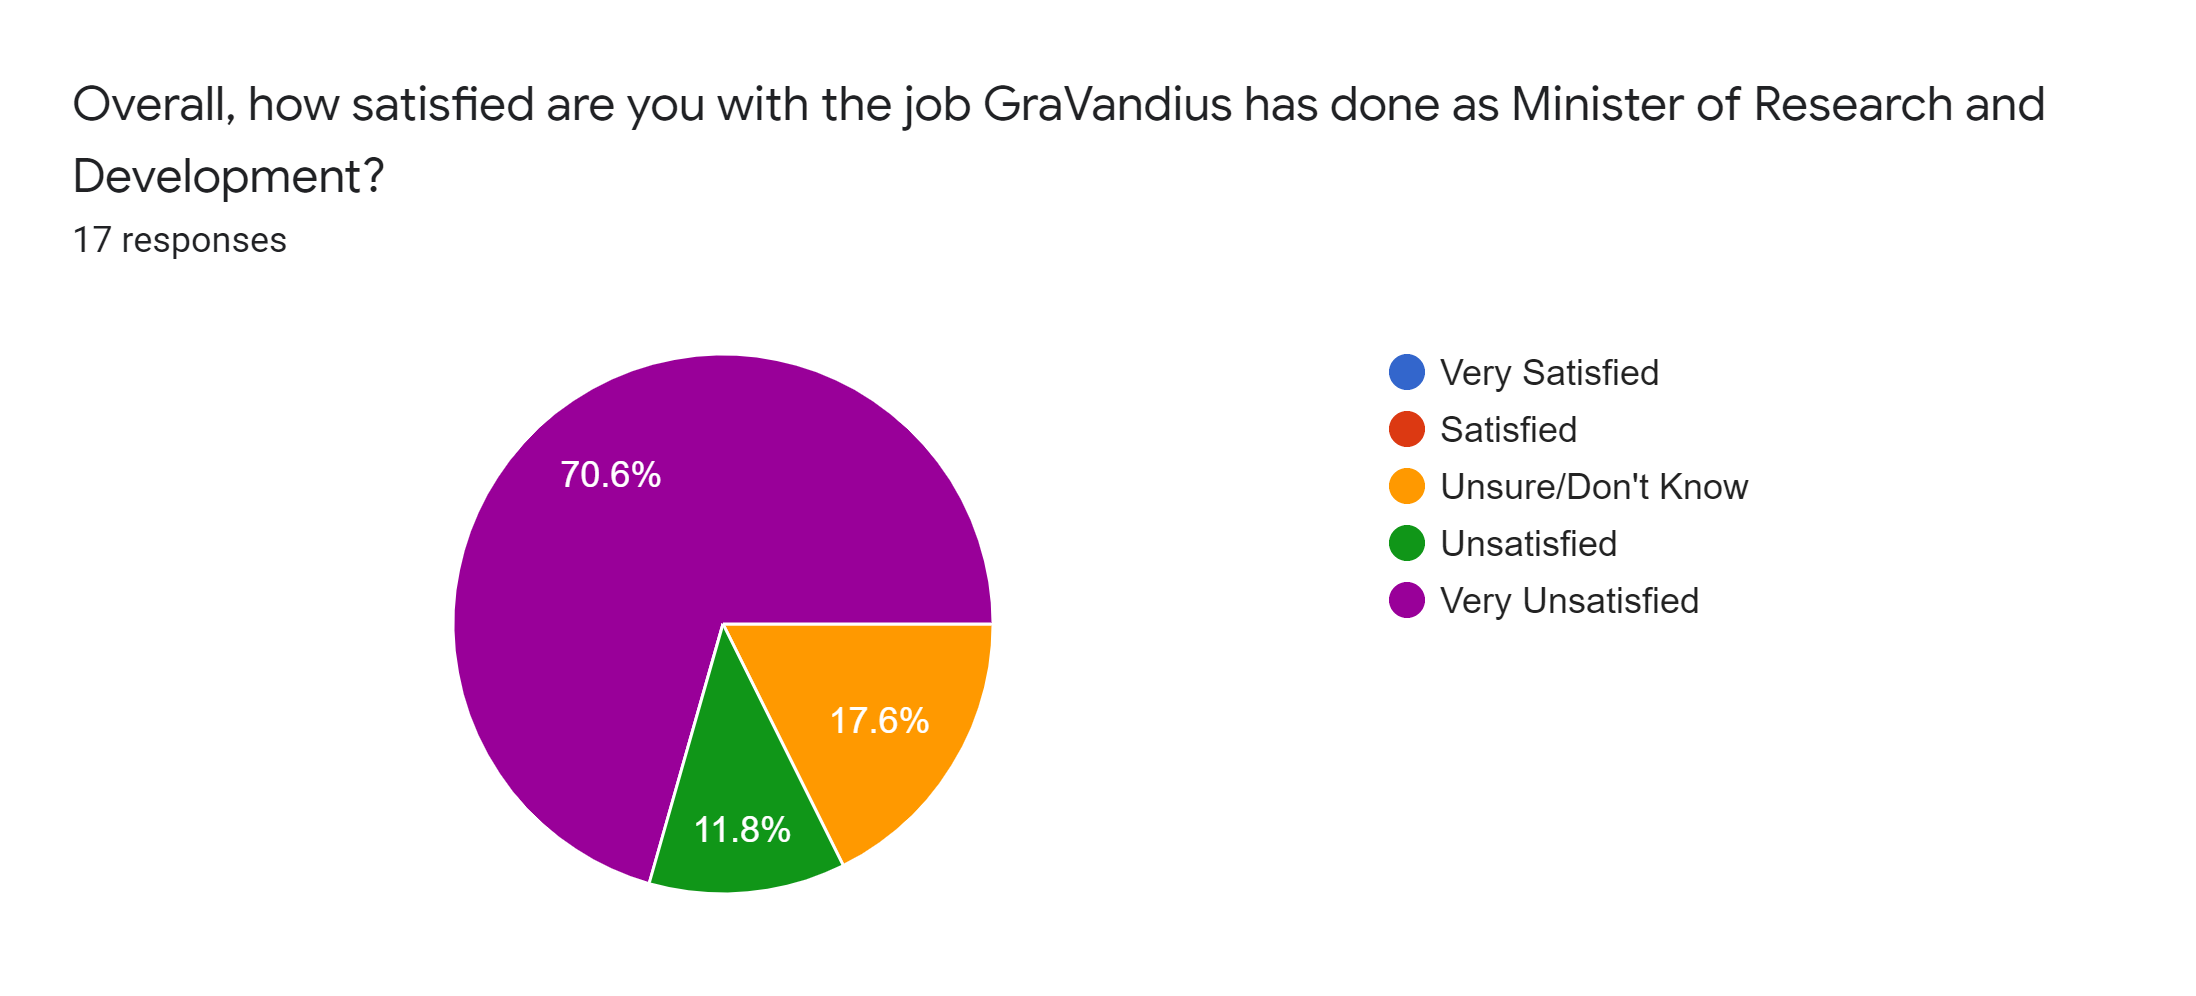 Forms response chart. Question title: Overall, how satisfied are you with the job GraVandius has done as Minister of Research and Development?. Number of responses: 17 responses.